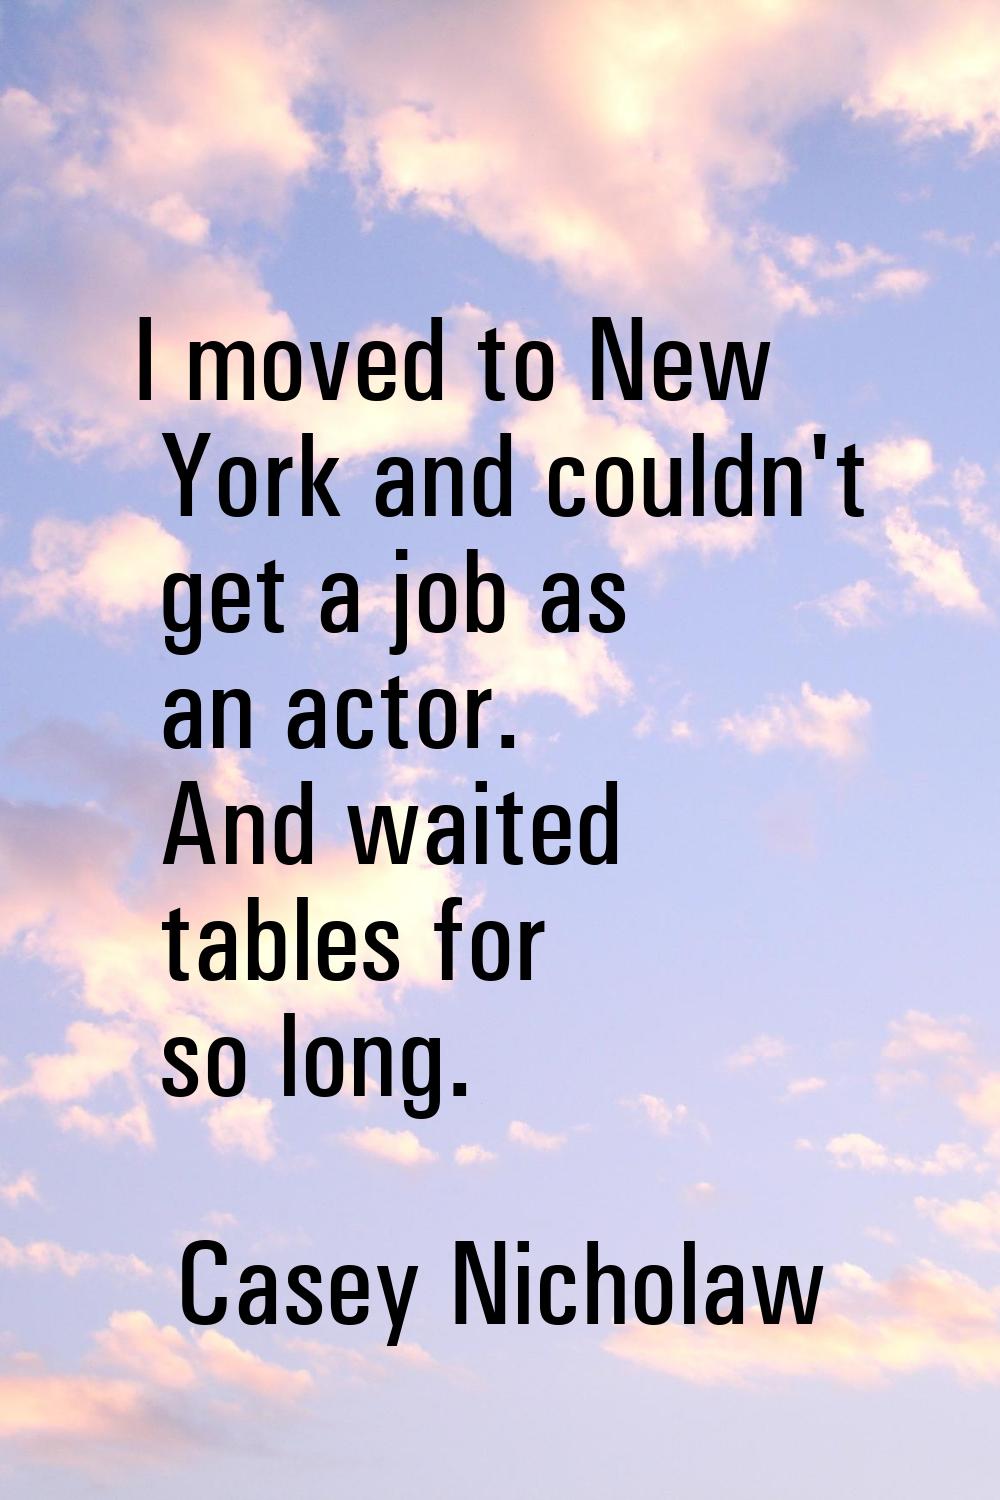 I moved to New York and couldn't get a job as an actor. And waited tables for so long.